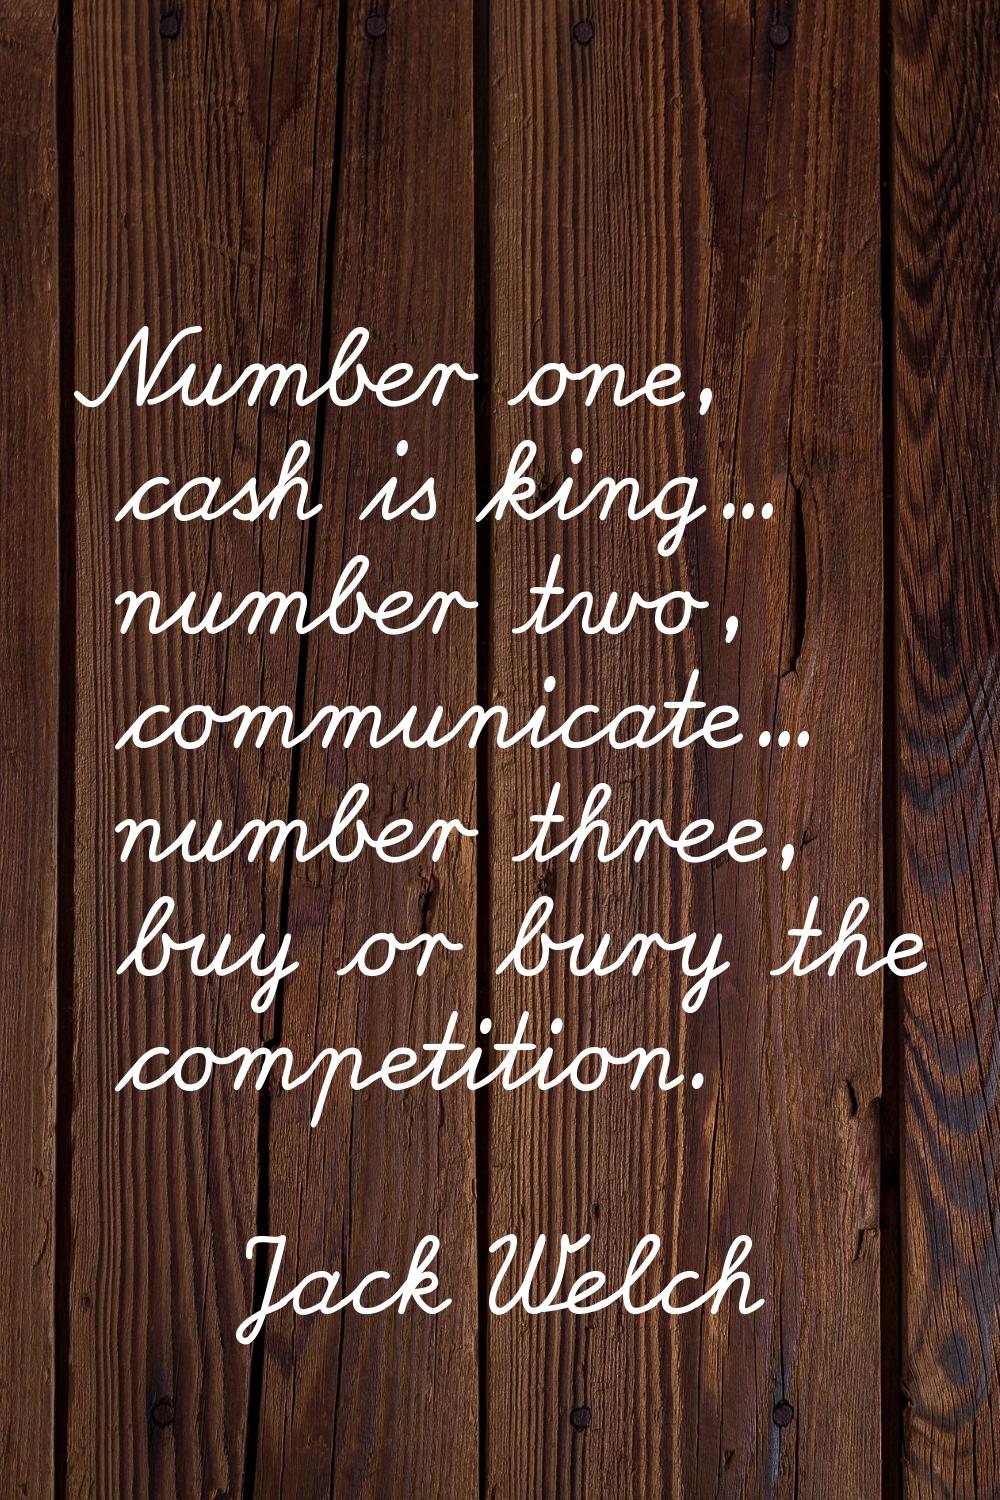 Number one, cash is king... number two, communicate... number three, buy or bury the competition.